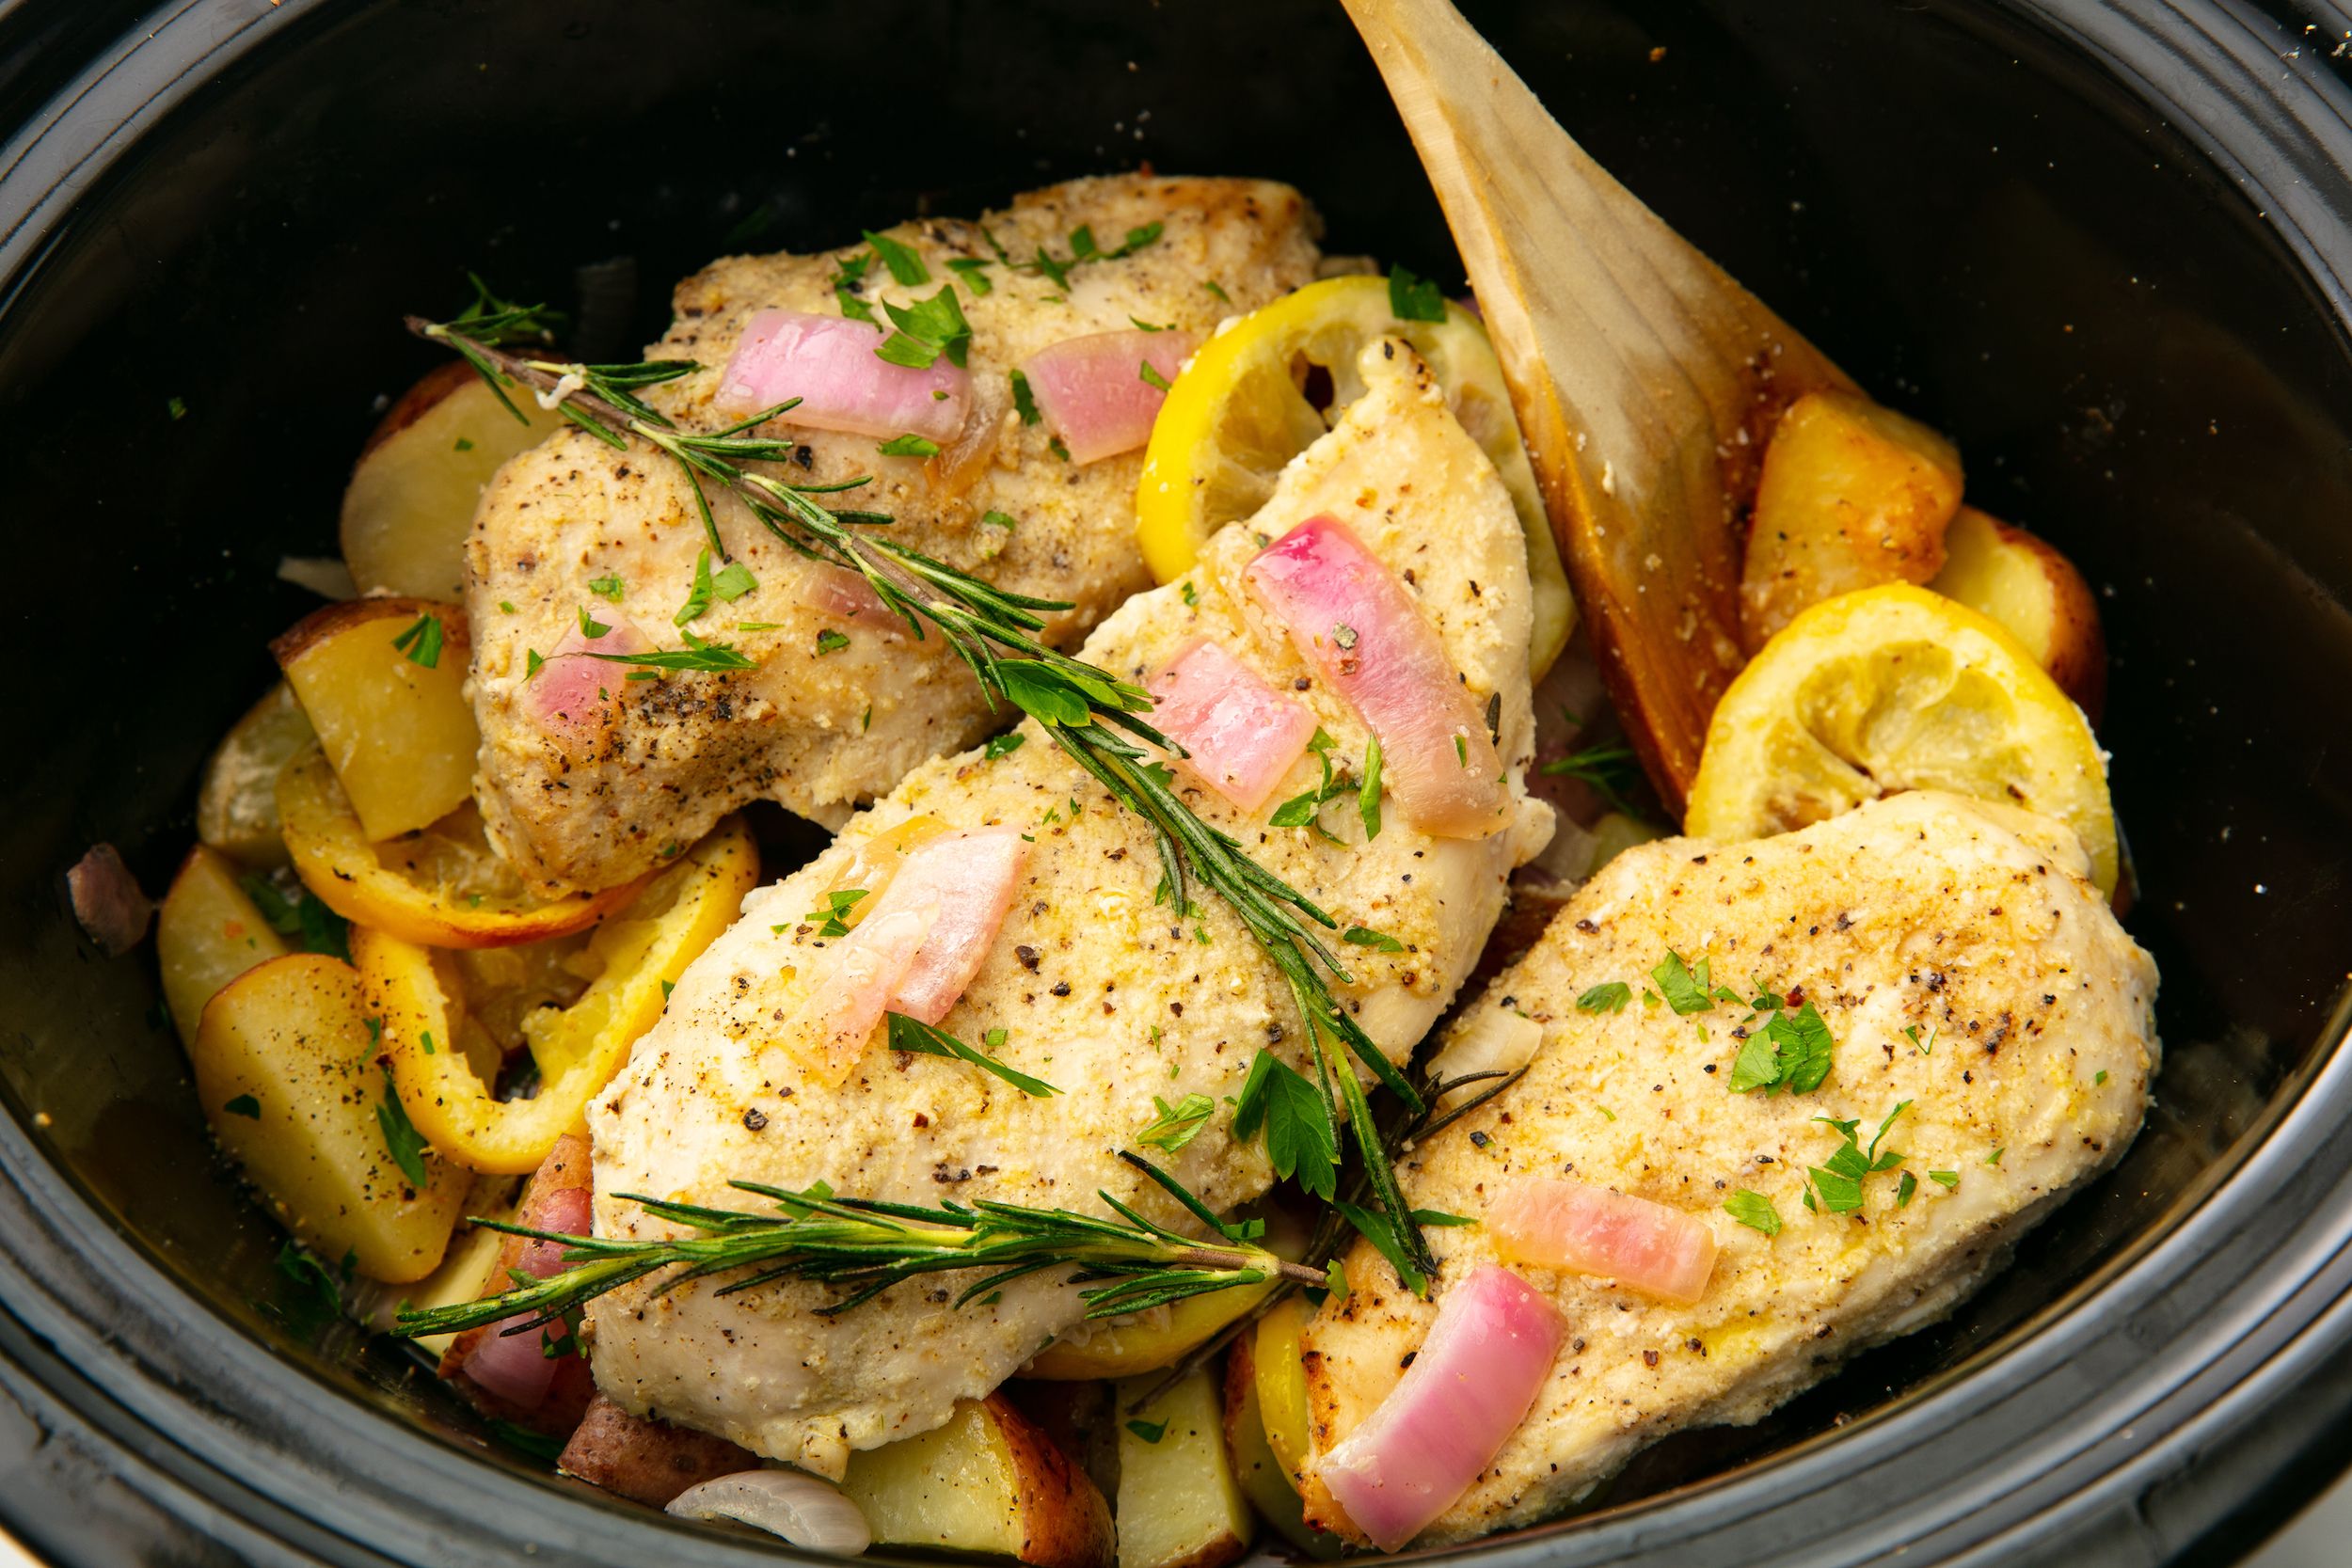 How To Make The Best Slow Cooker Chicken Breast Recipe